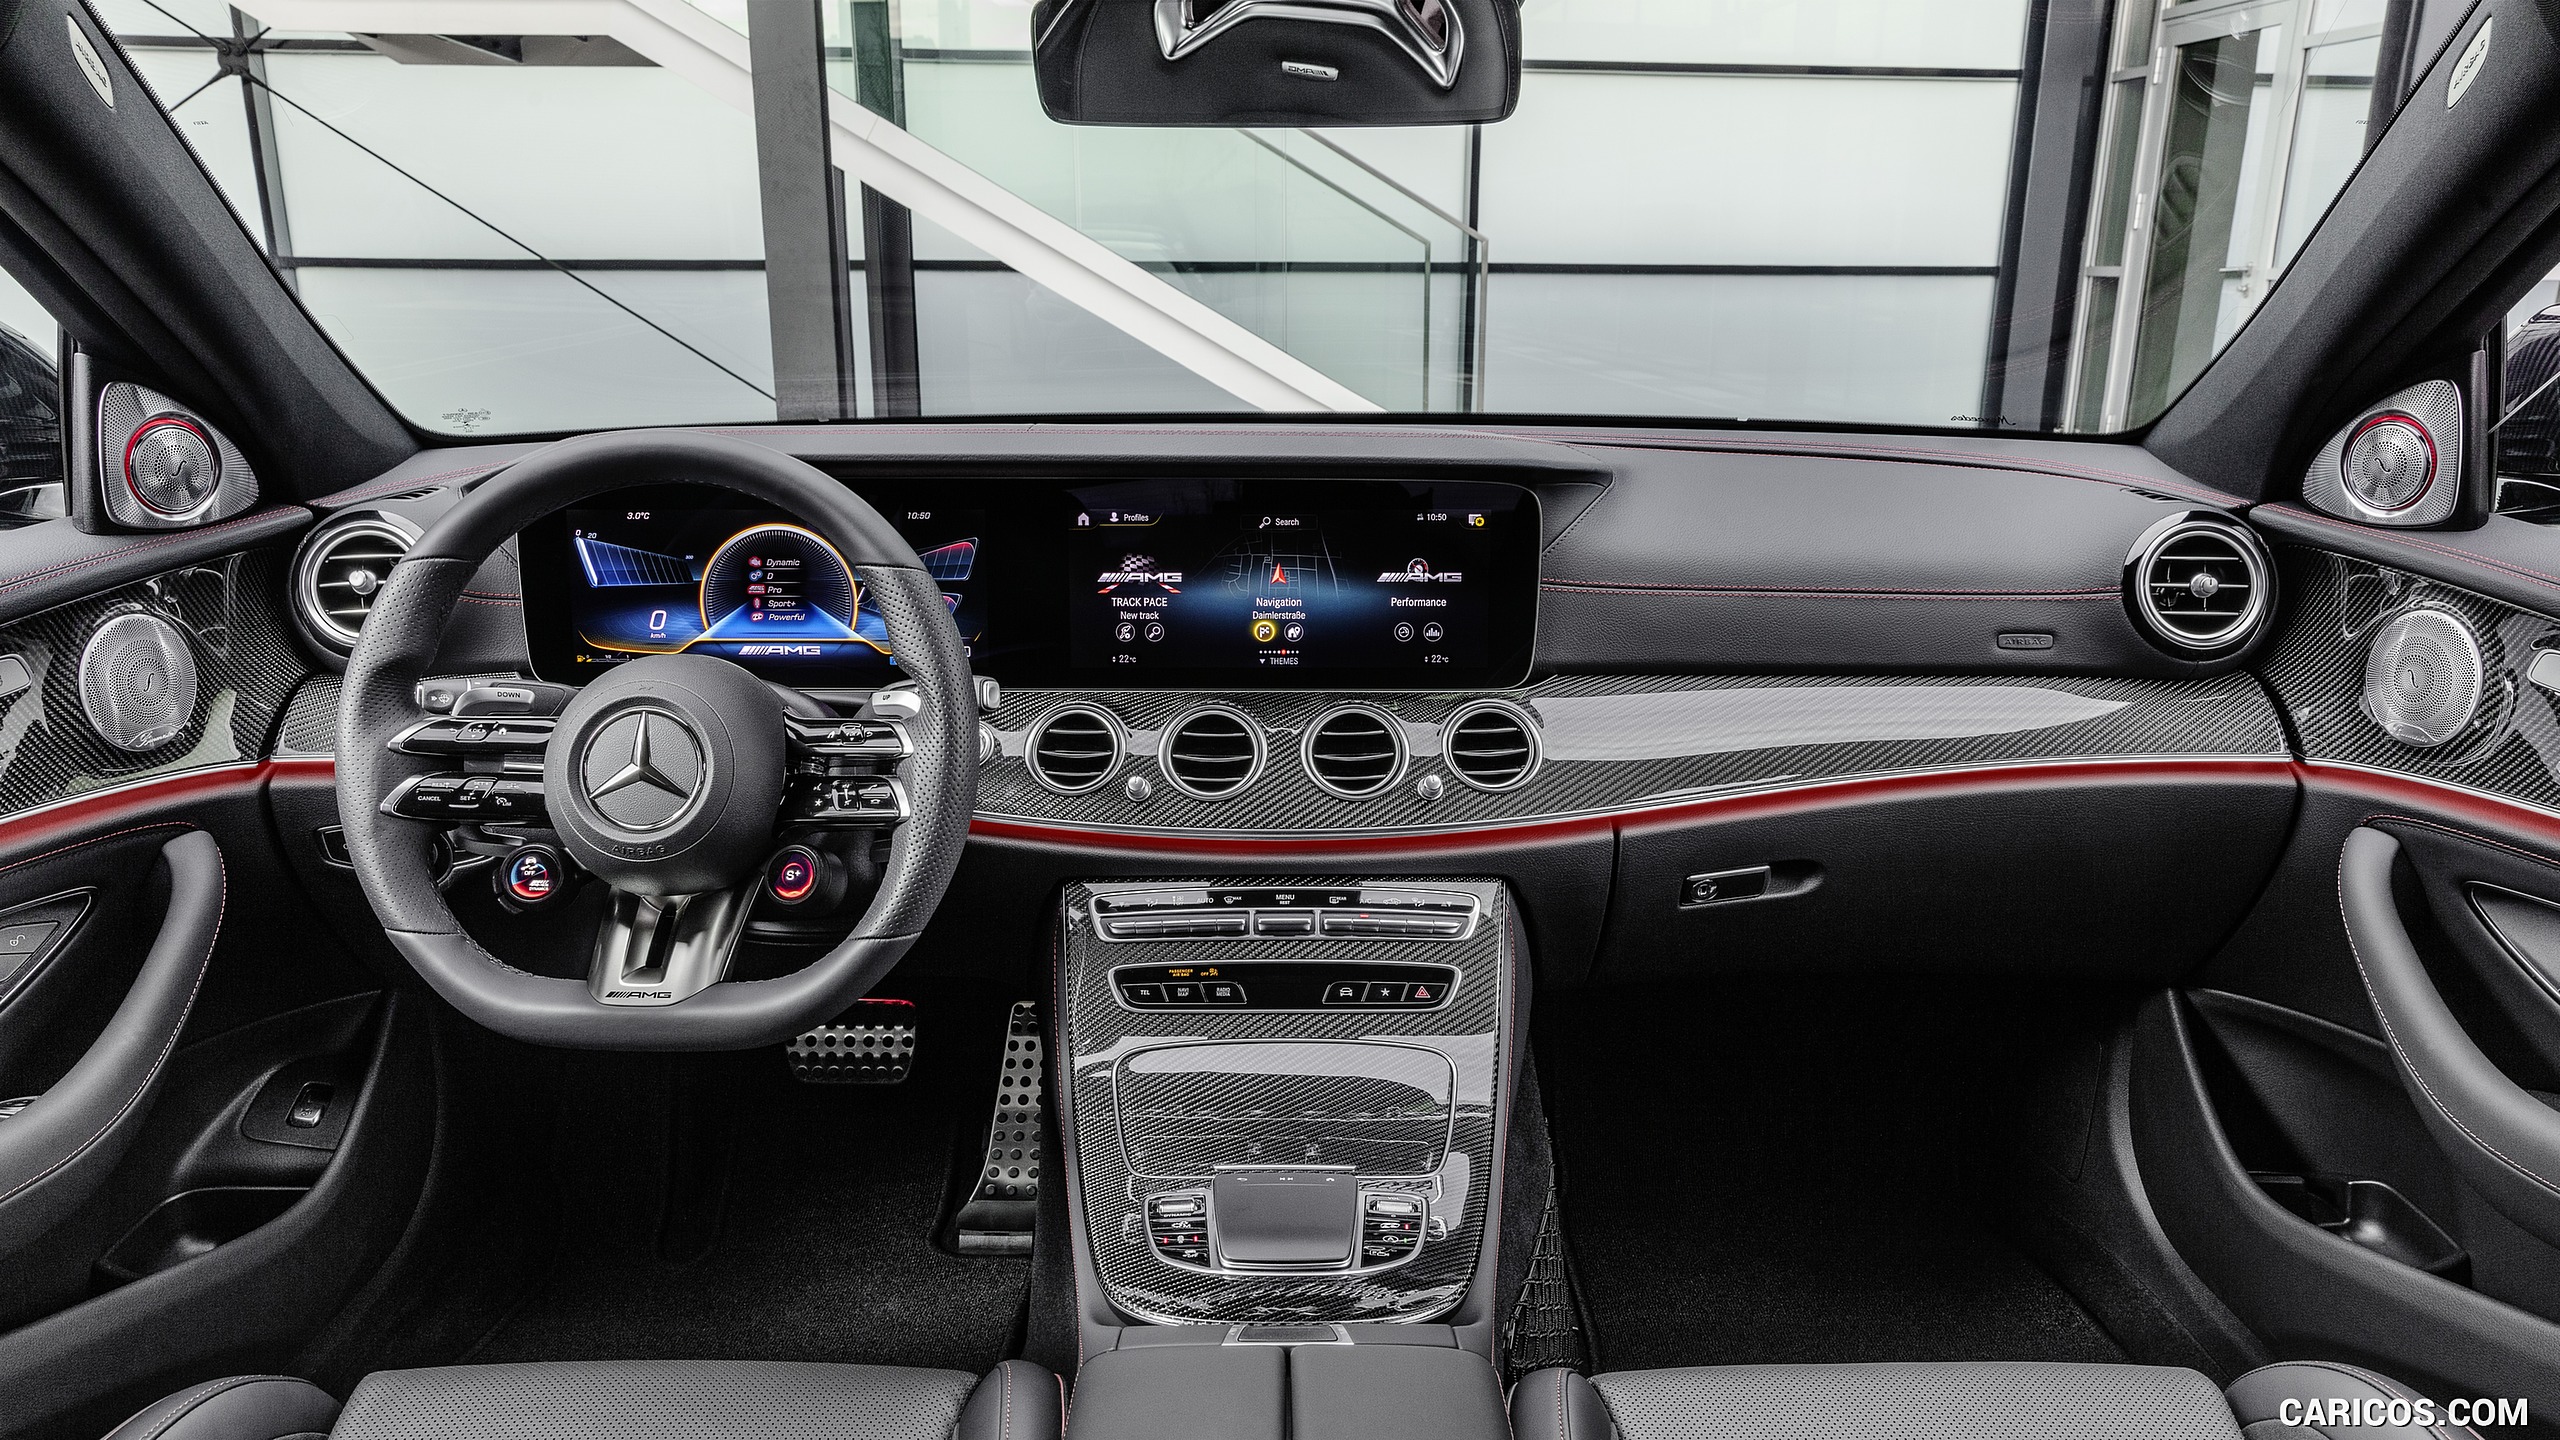 2021 Mercedes-AMG E 53 4MATIC+ Night Package - Interior, Cockpit, #20 of 21